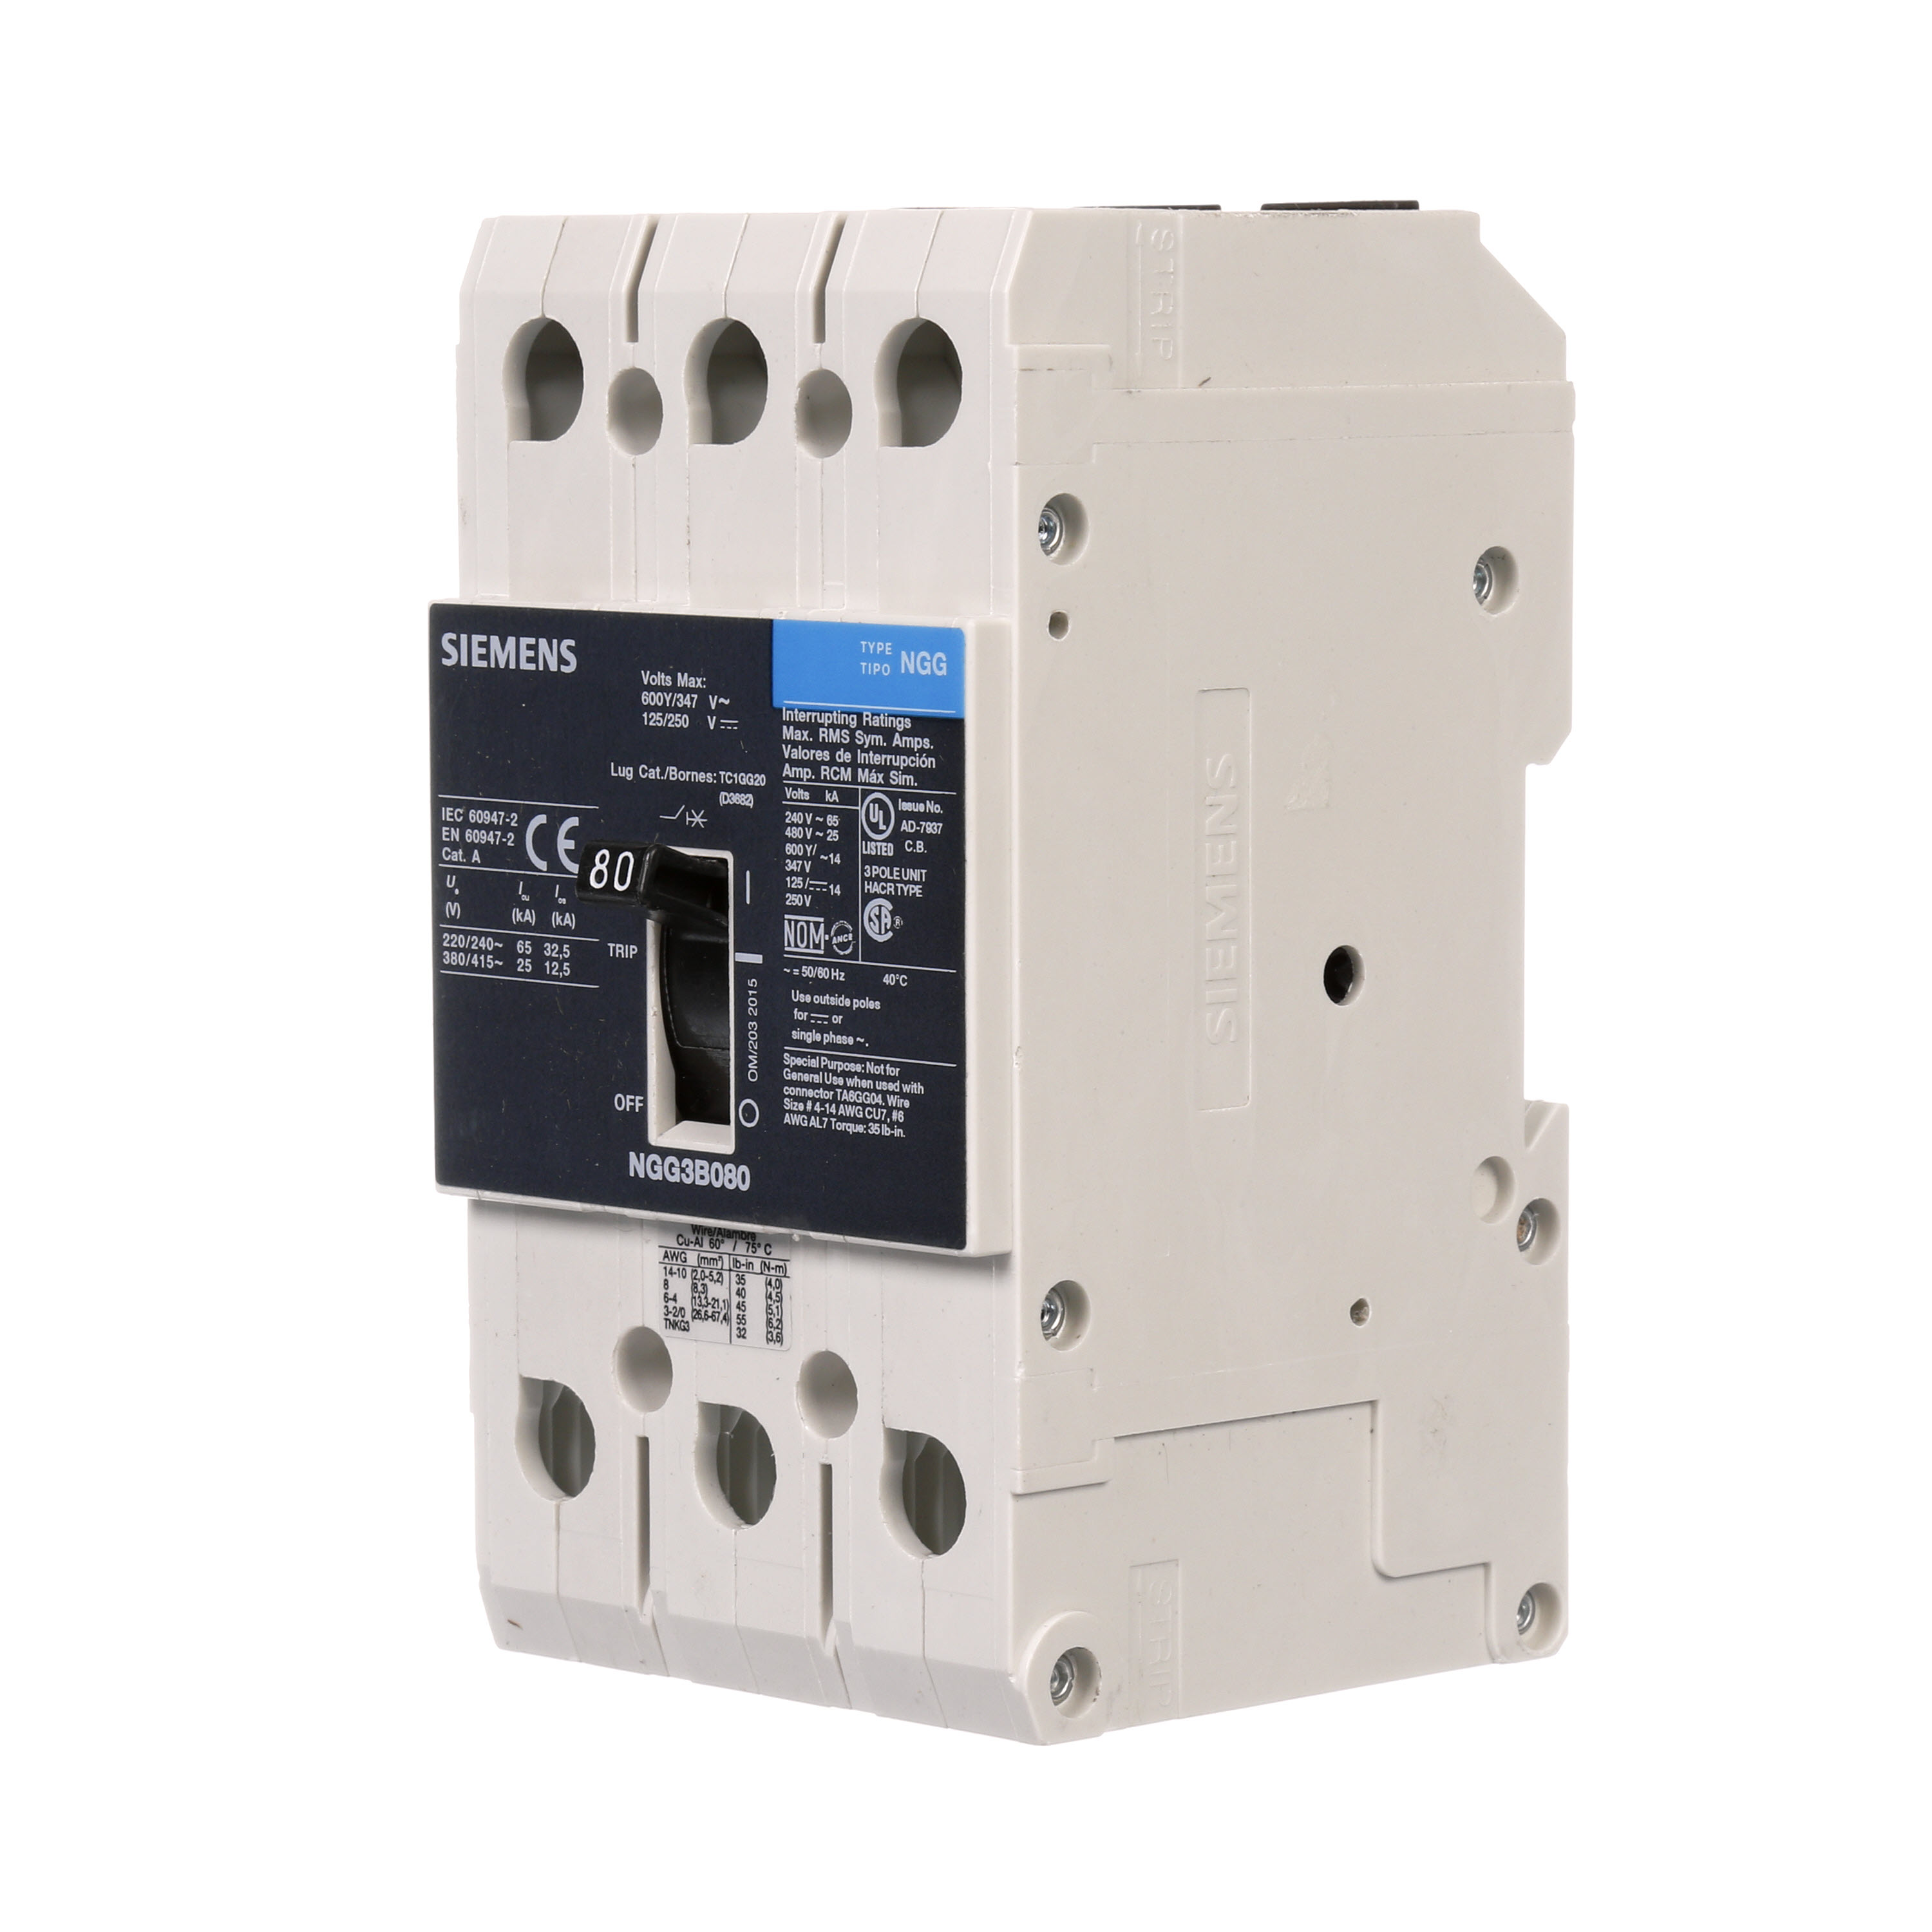 SIEMENS LOW VOLTAGE G FRAME CIRCUIT BREAKER WITH THERMAL - MAGNETIC TRIP. UL LISTED NGG FRAME WITH STANDARD BREAKING CAPACITY. 80A 3-POLE (14KAIC AT 600Y/347V)(25KAIC AT 480V). SPECIAL FEATURES MOUNTS ON DIN RAIL / SCREW, LINE AND LOAD SIDE LUGS (TC1GG20) WIRE RANGE 8 - 1/0 AWS (CU/AL). DIMENSIONS (W x H x D) IN 3 x 5.4 x 2.8.